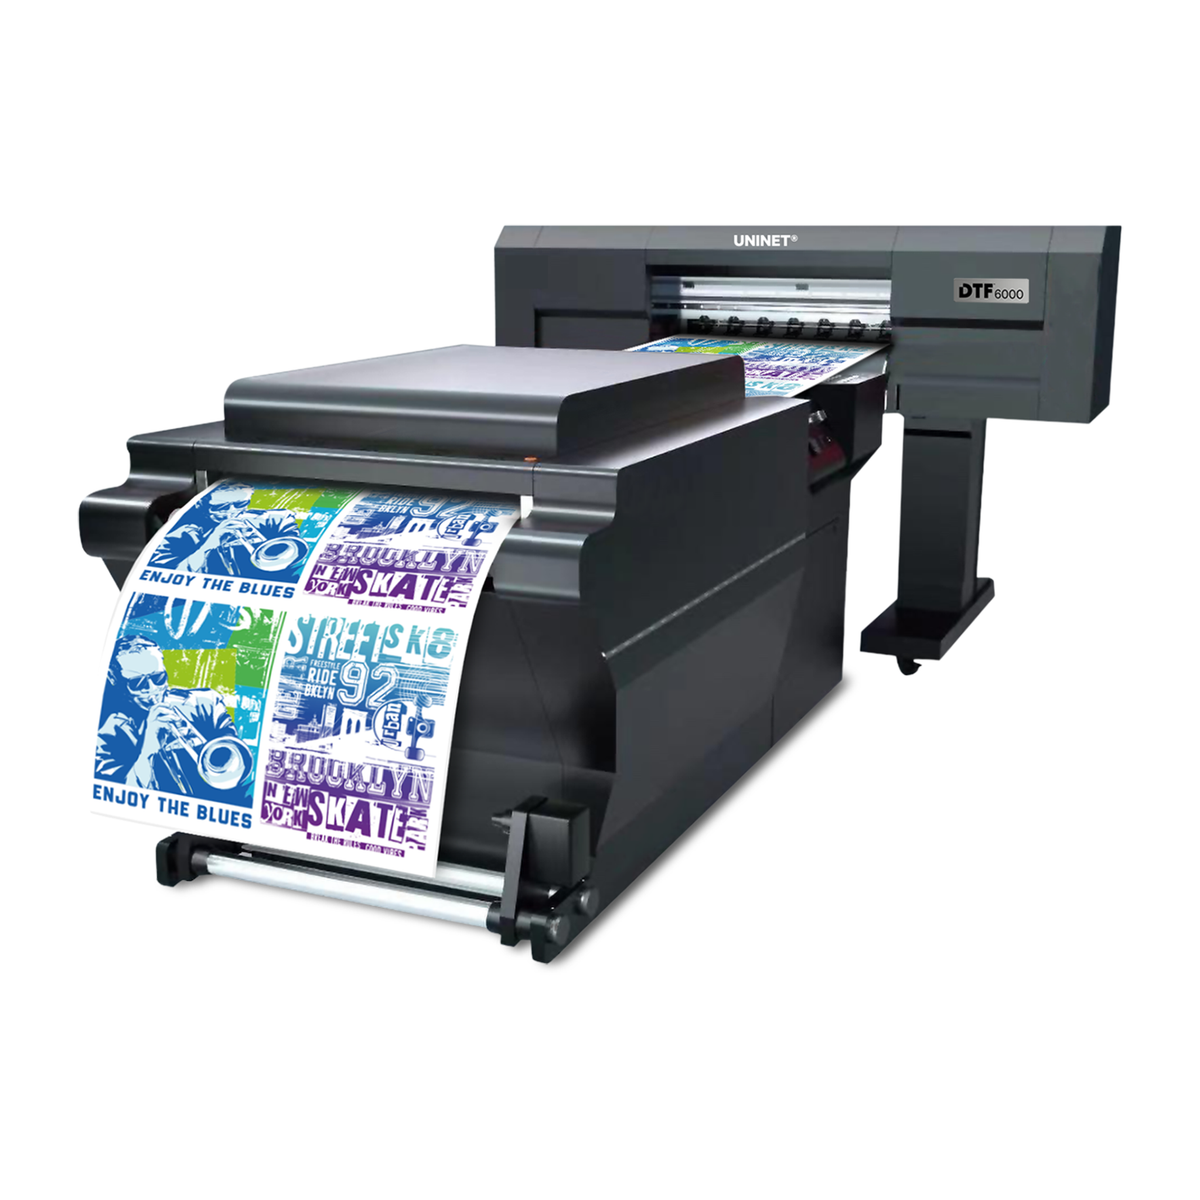 DTF 6000 Printer - Deluxe PRO Package with Hotronix Hover Heat Press 16” x 24” and Fume Extractor